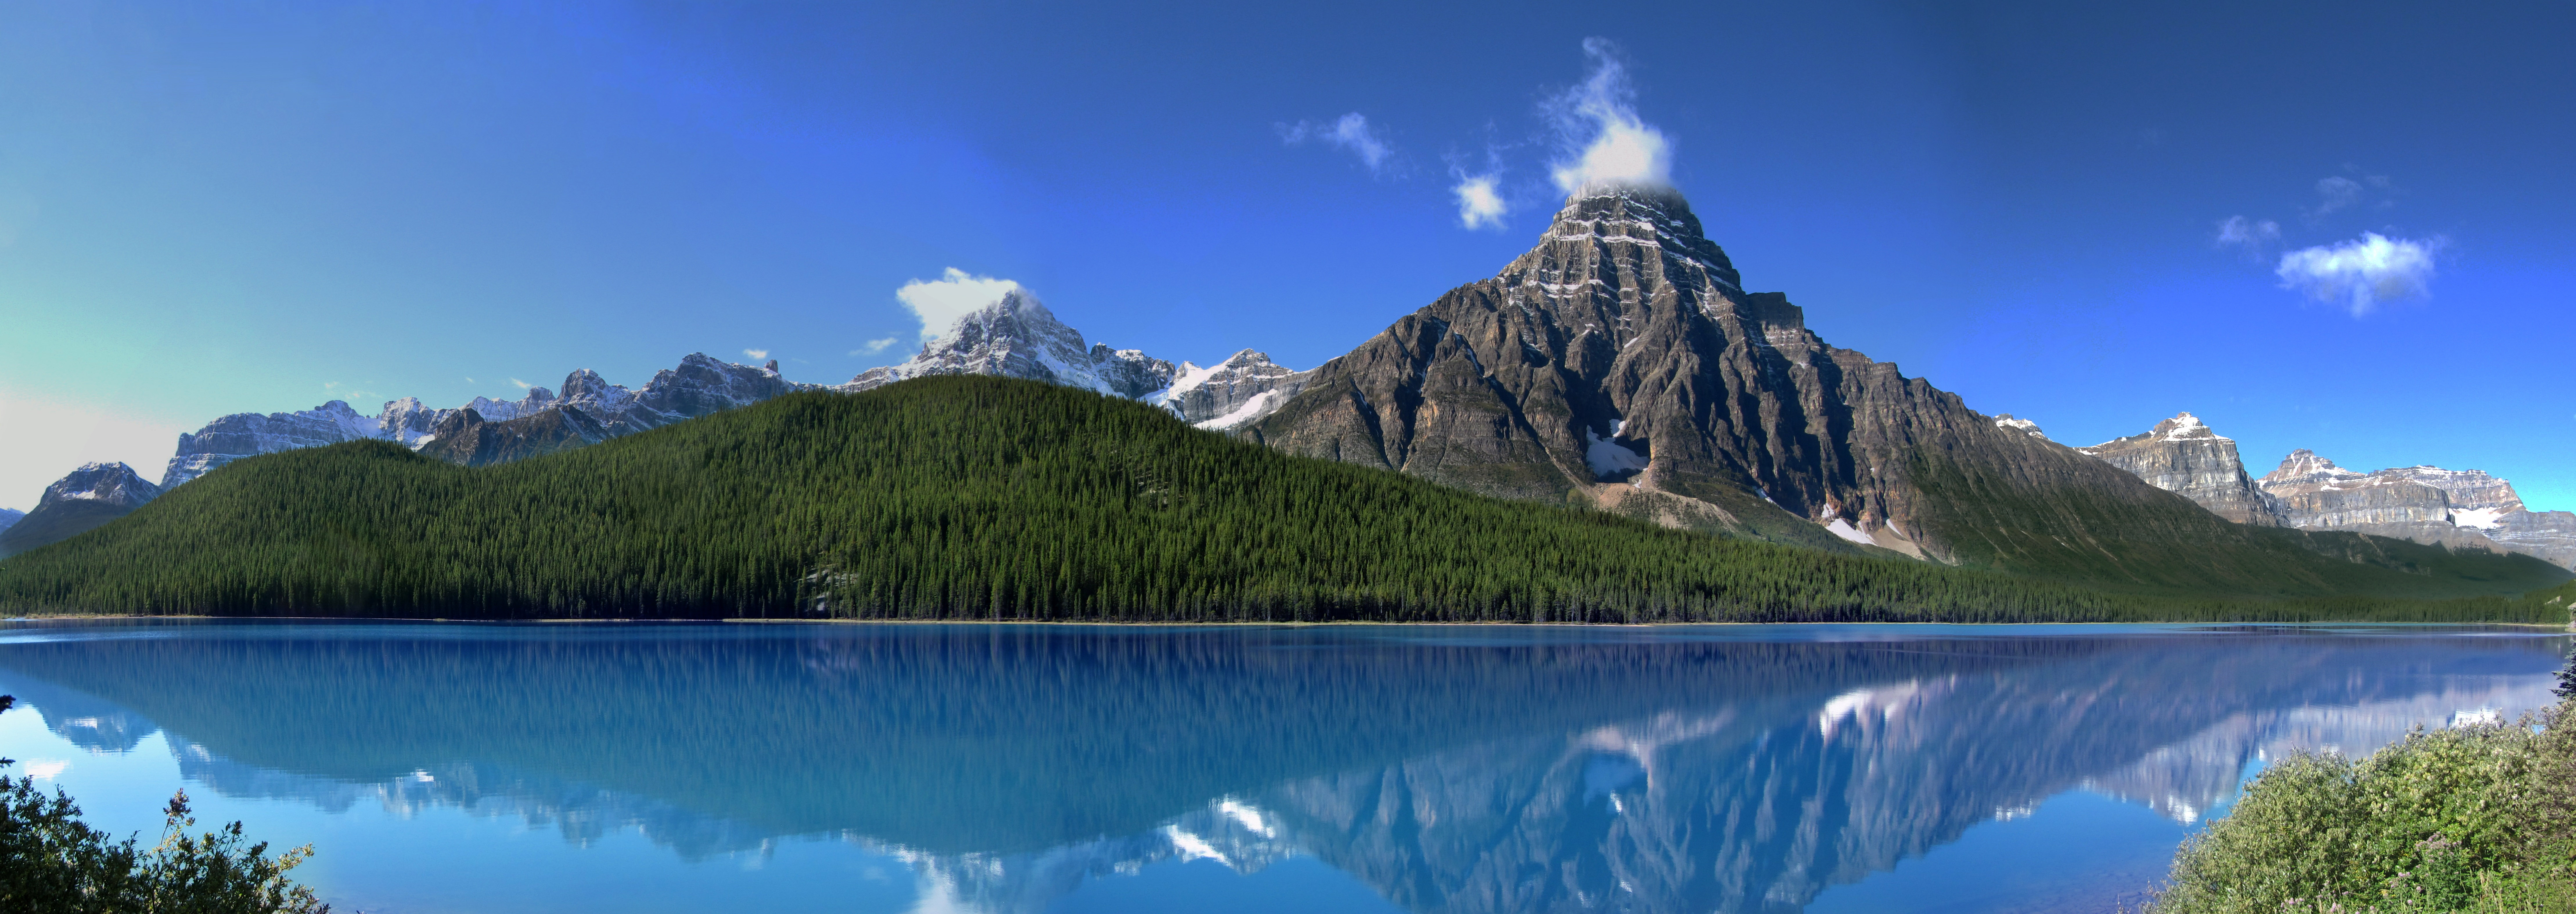 Rocky Mountains of British Columbia landscape in Canada image - Free ...